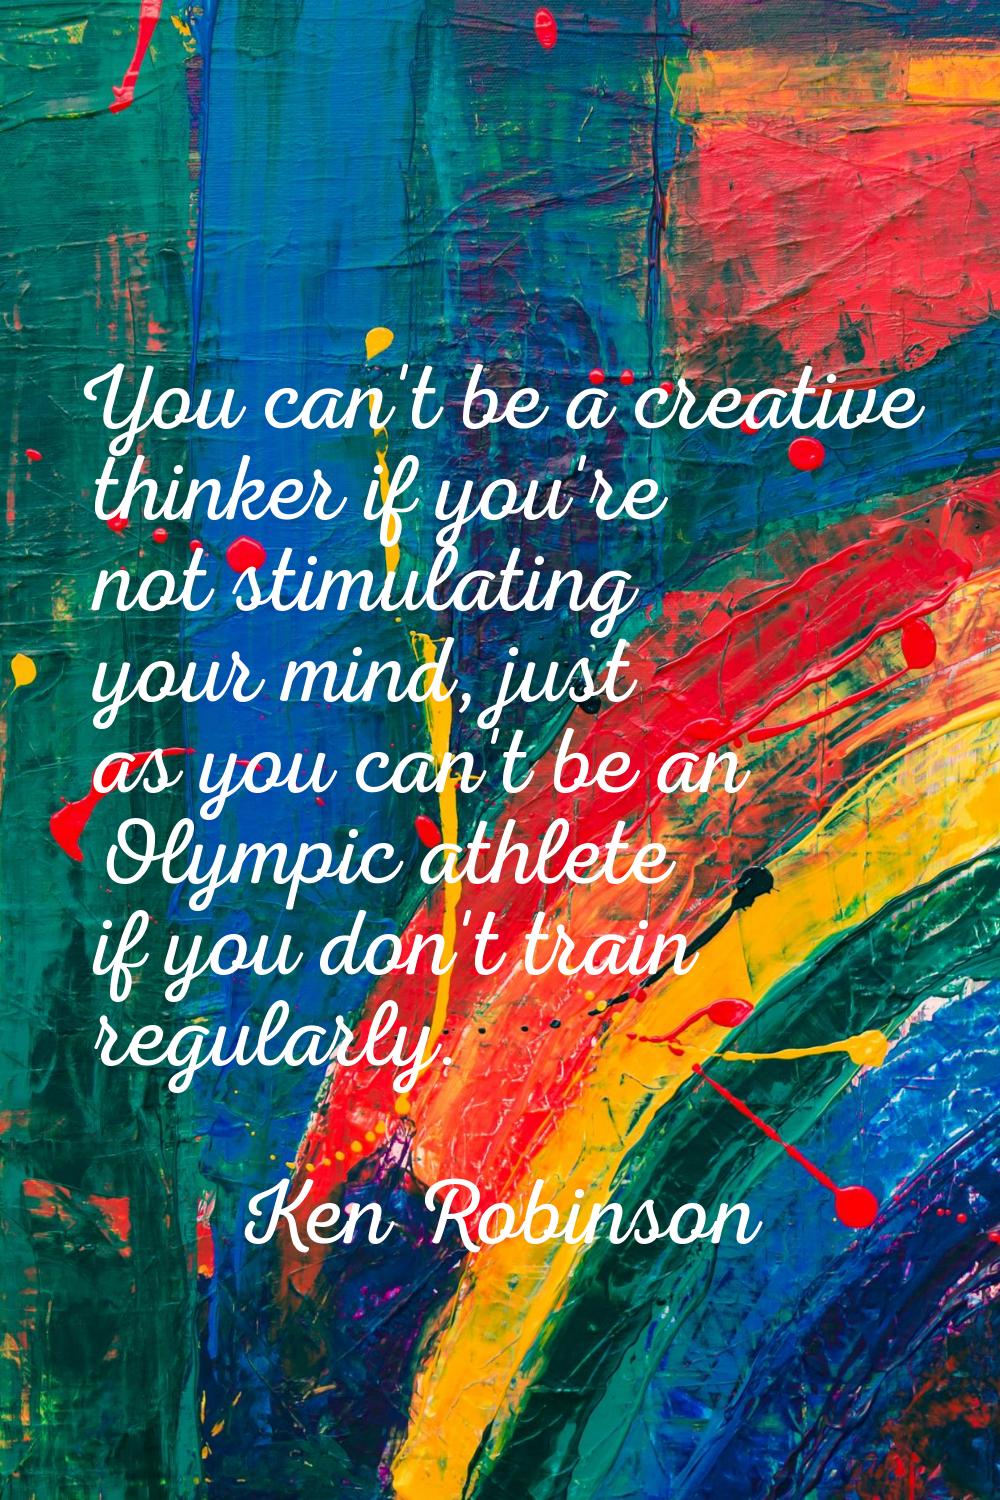 You can't be a creative thinker if you're not stimulating your mind, just as you can't be an Olympi